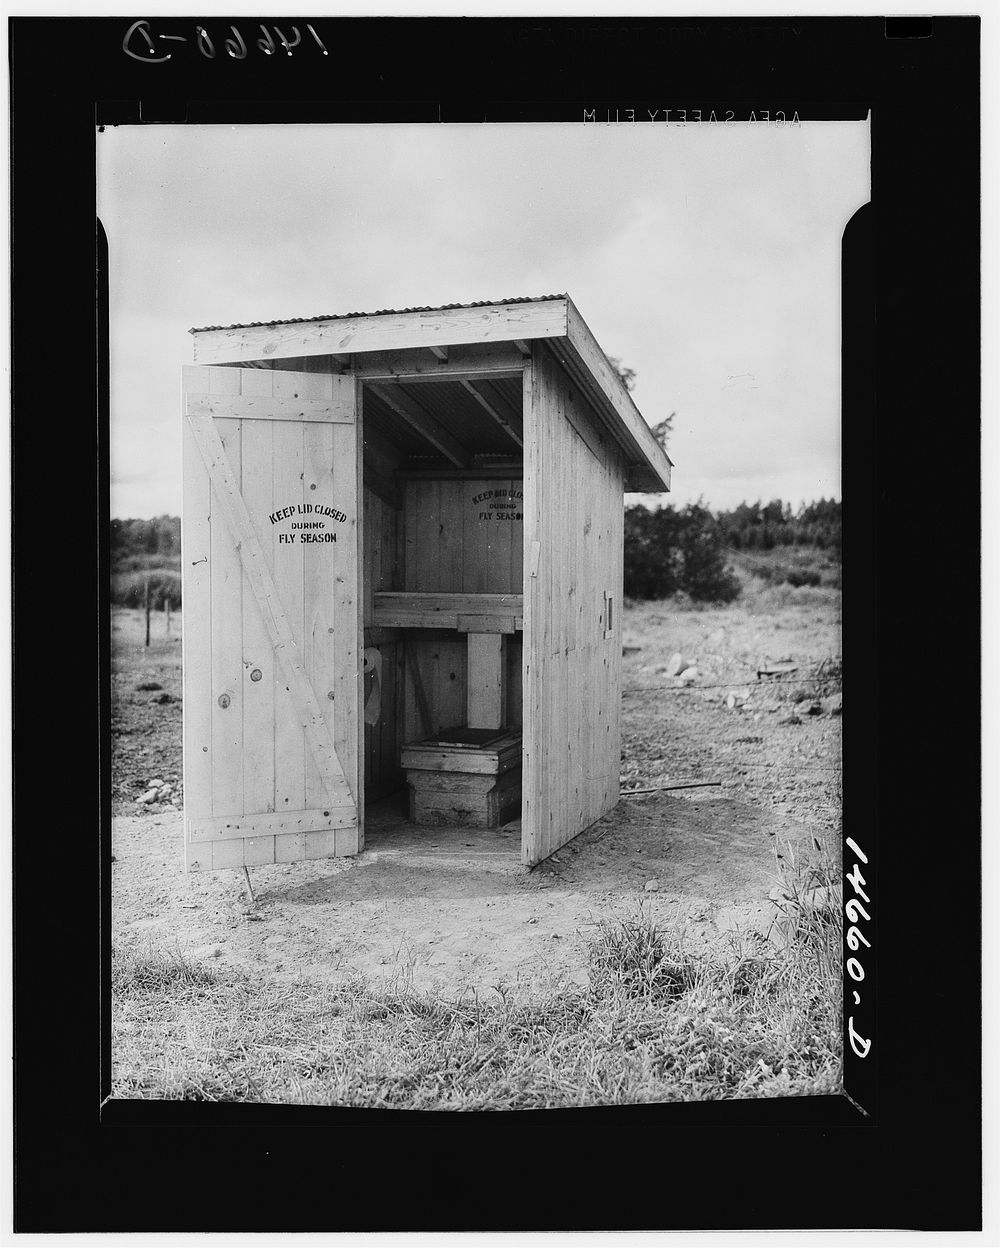 Complete privy properly protected to prevent flies from spreading diseases. Sourced from the Library of Congress.